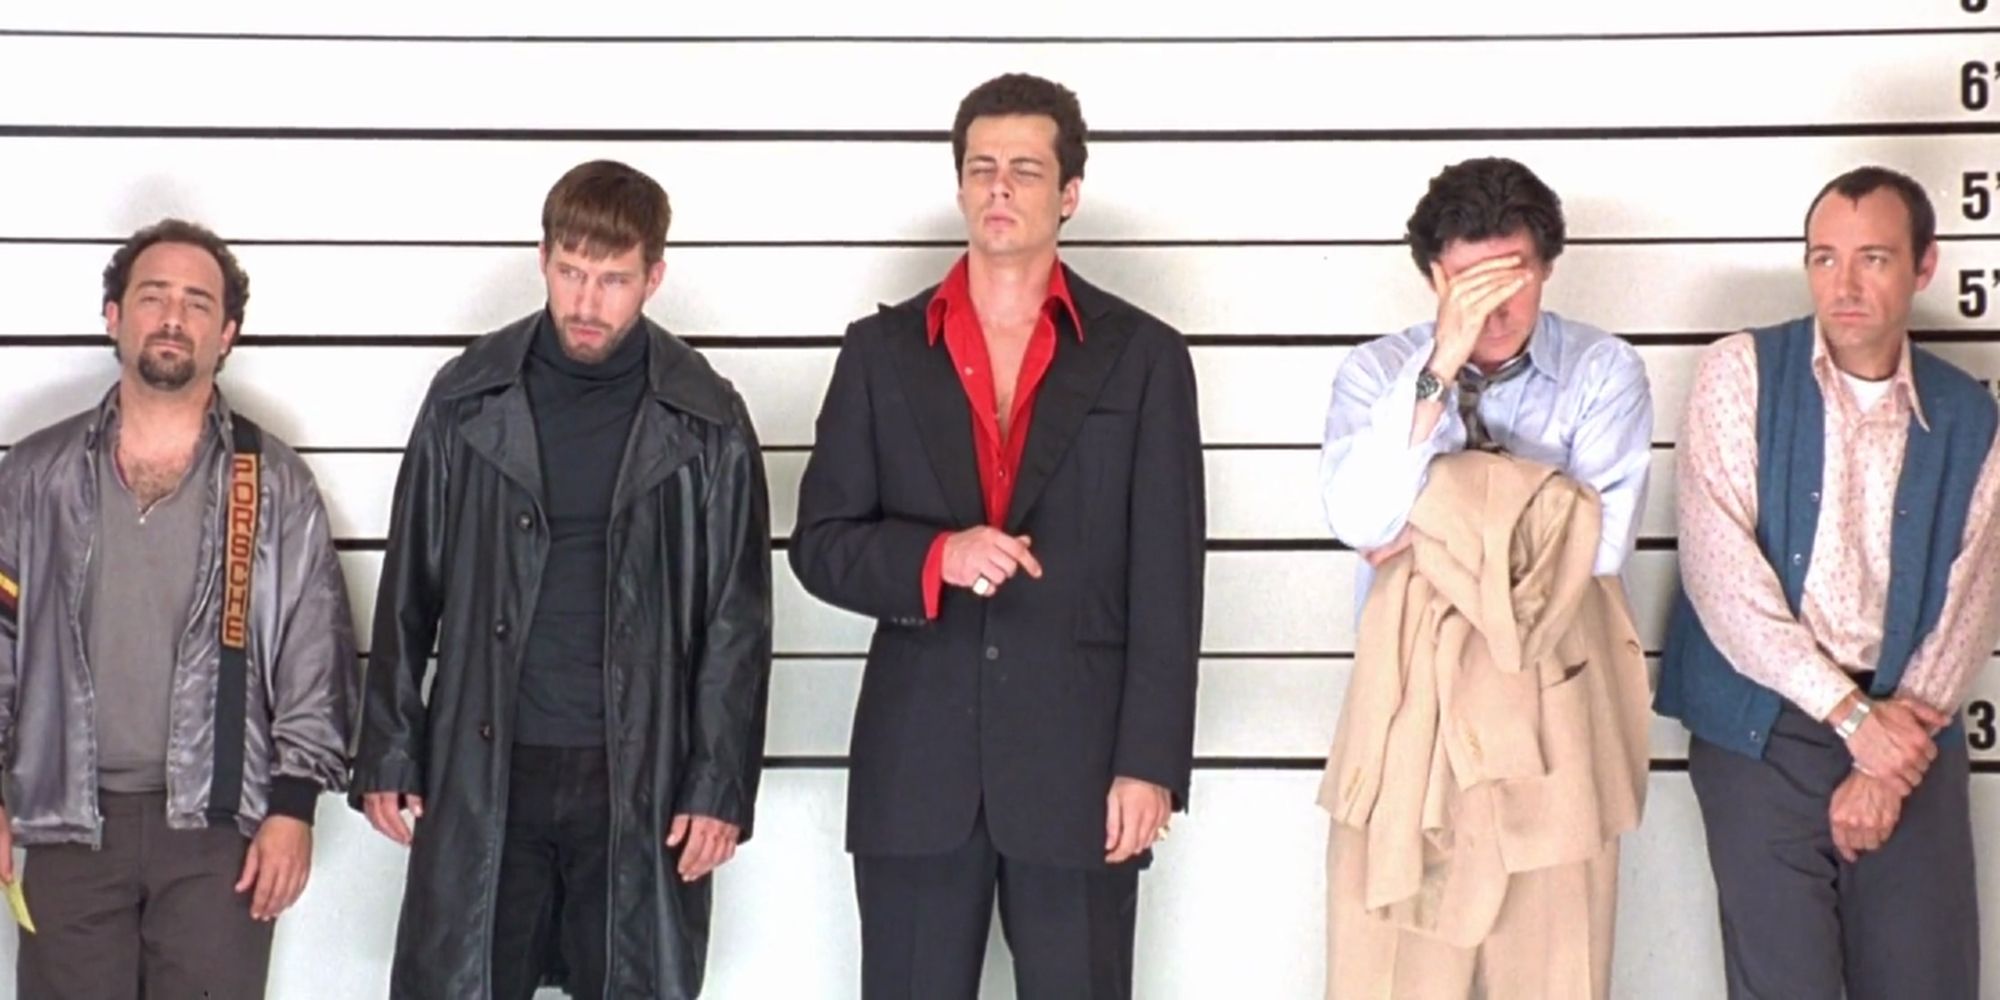 The cast of 'The Usual Suspects'